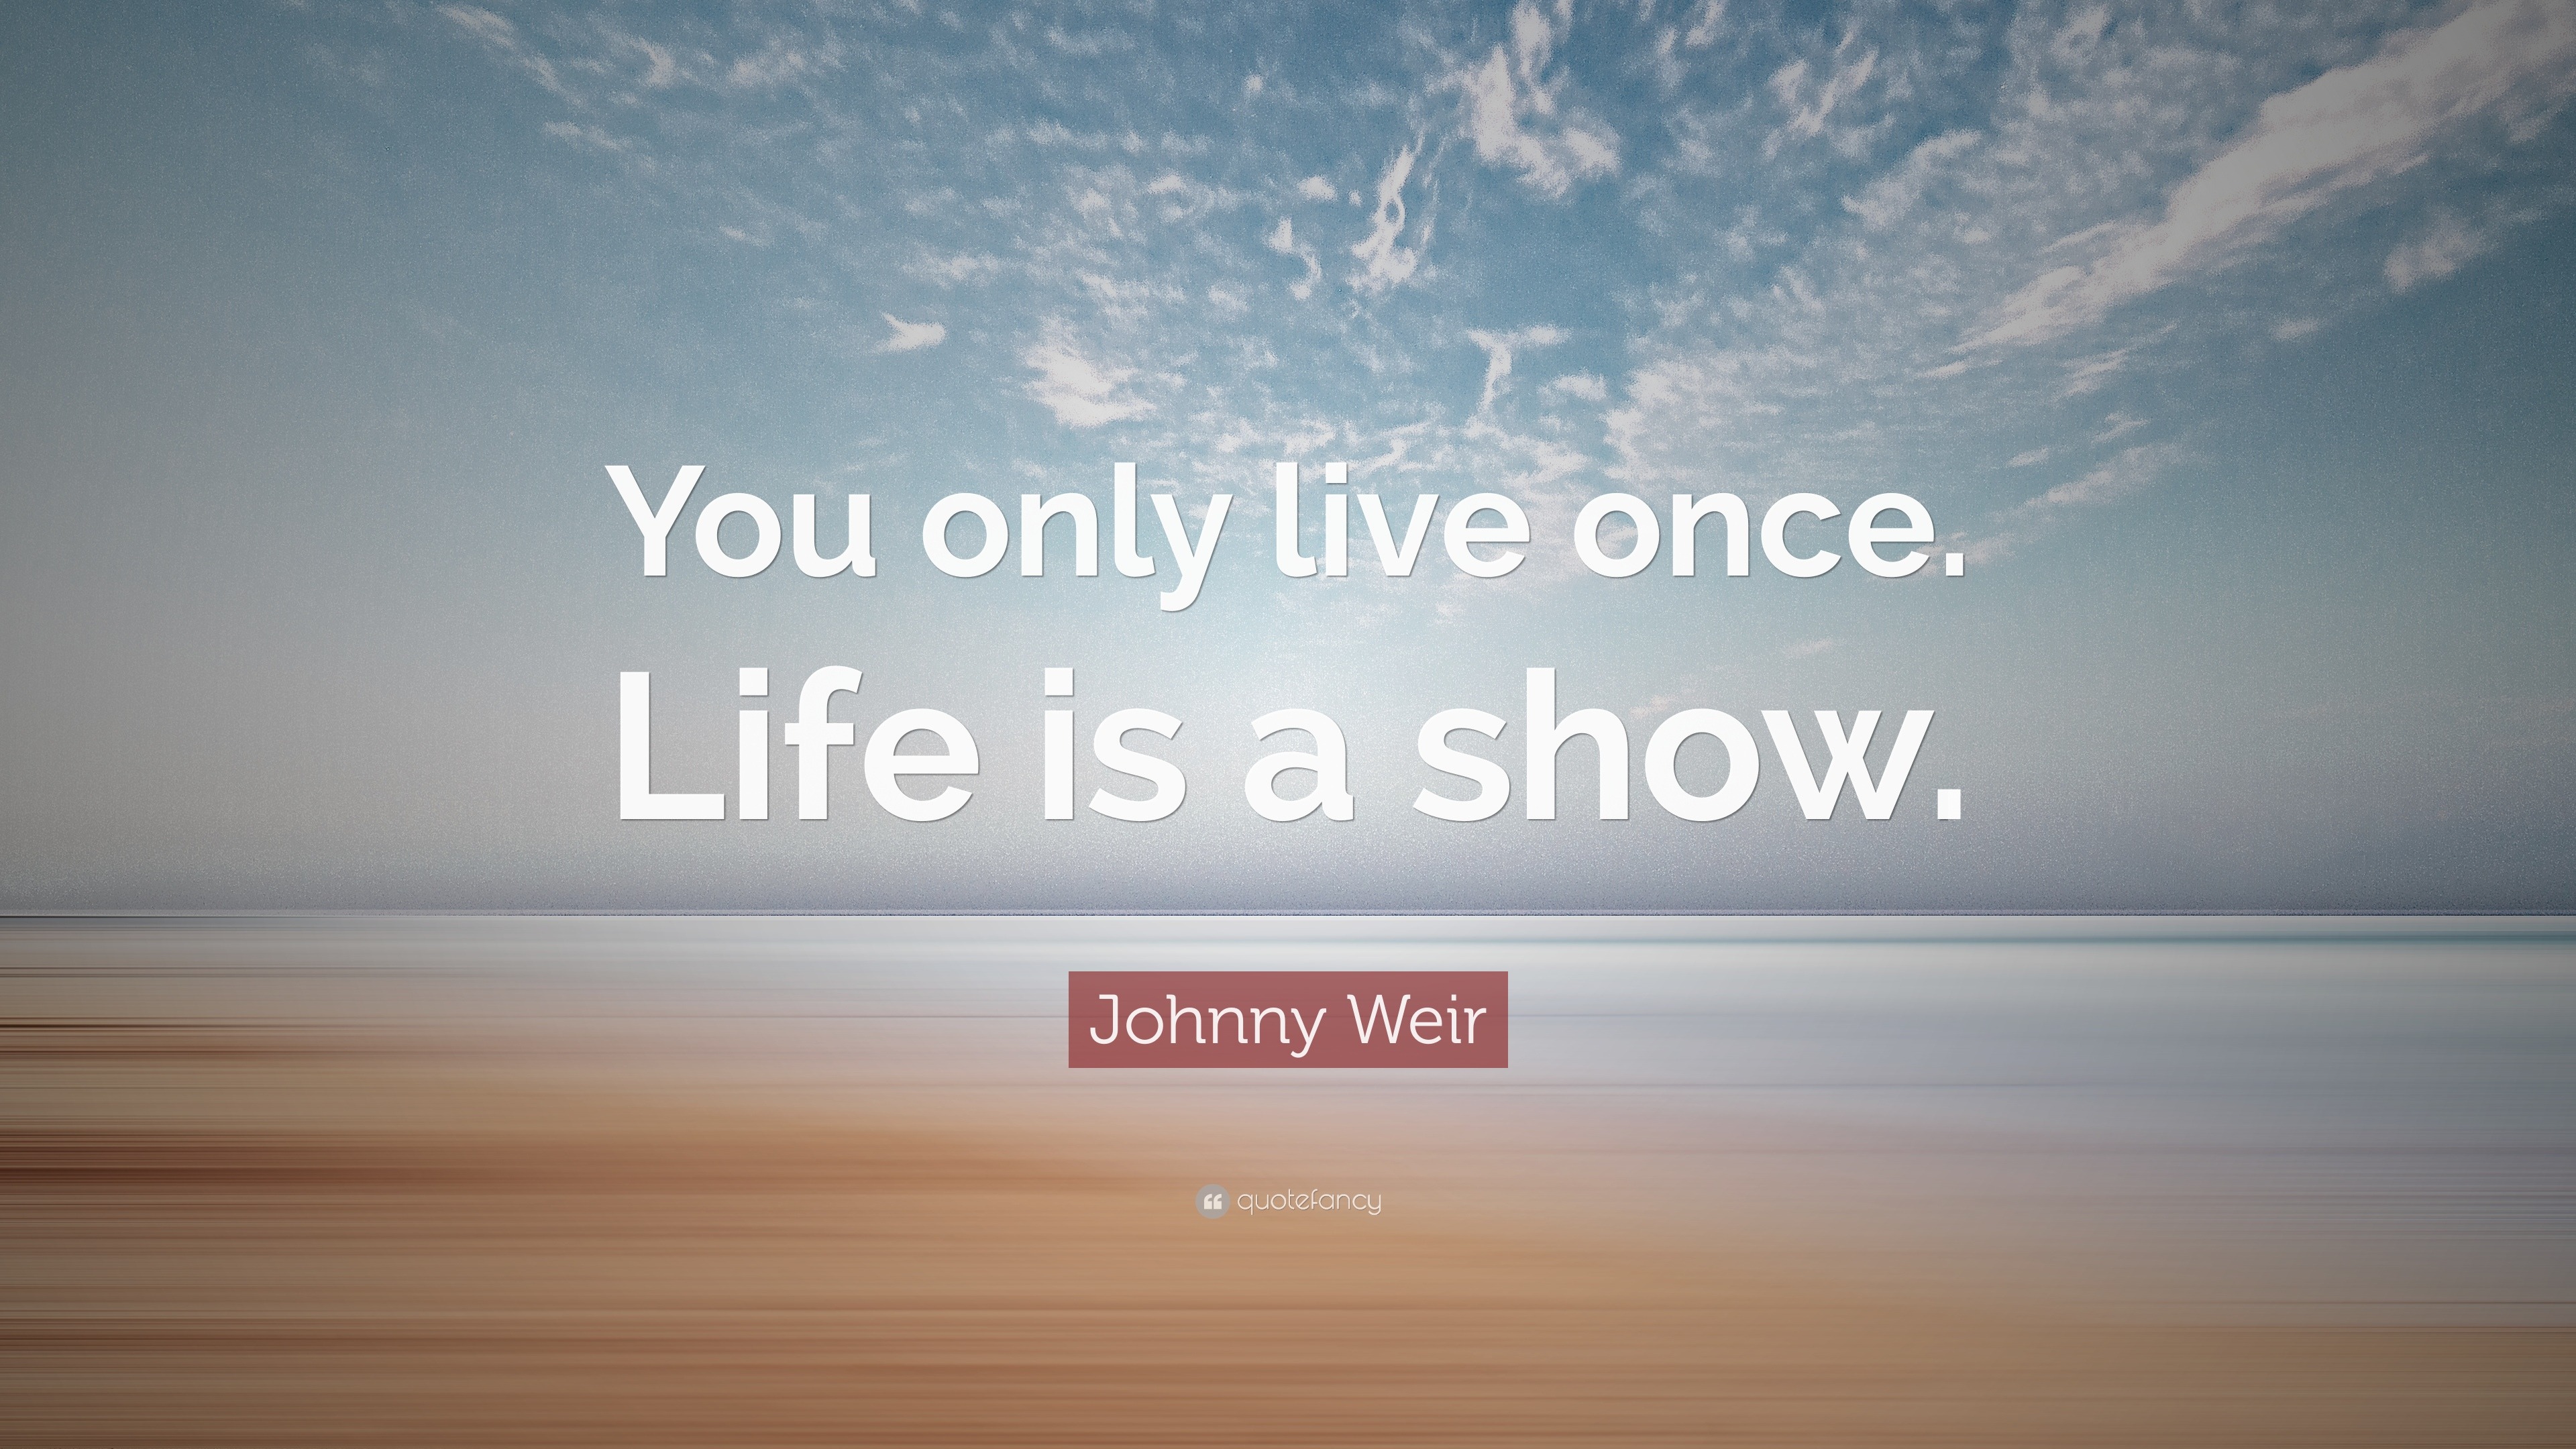 Johnny Weir Quote “You only live once Life is a show ”